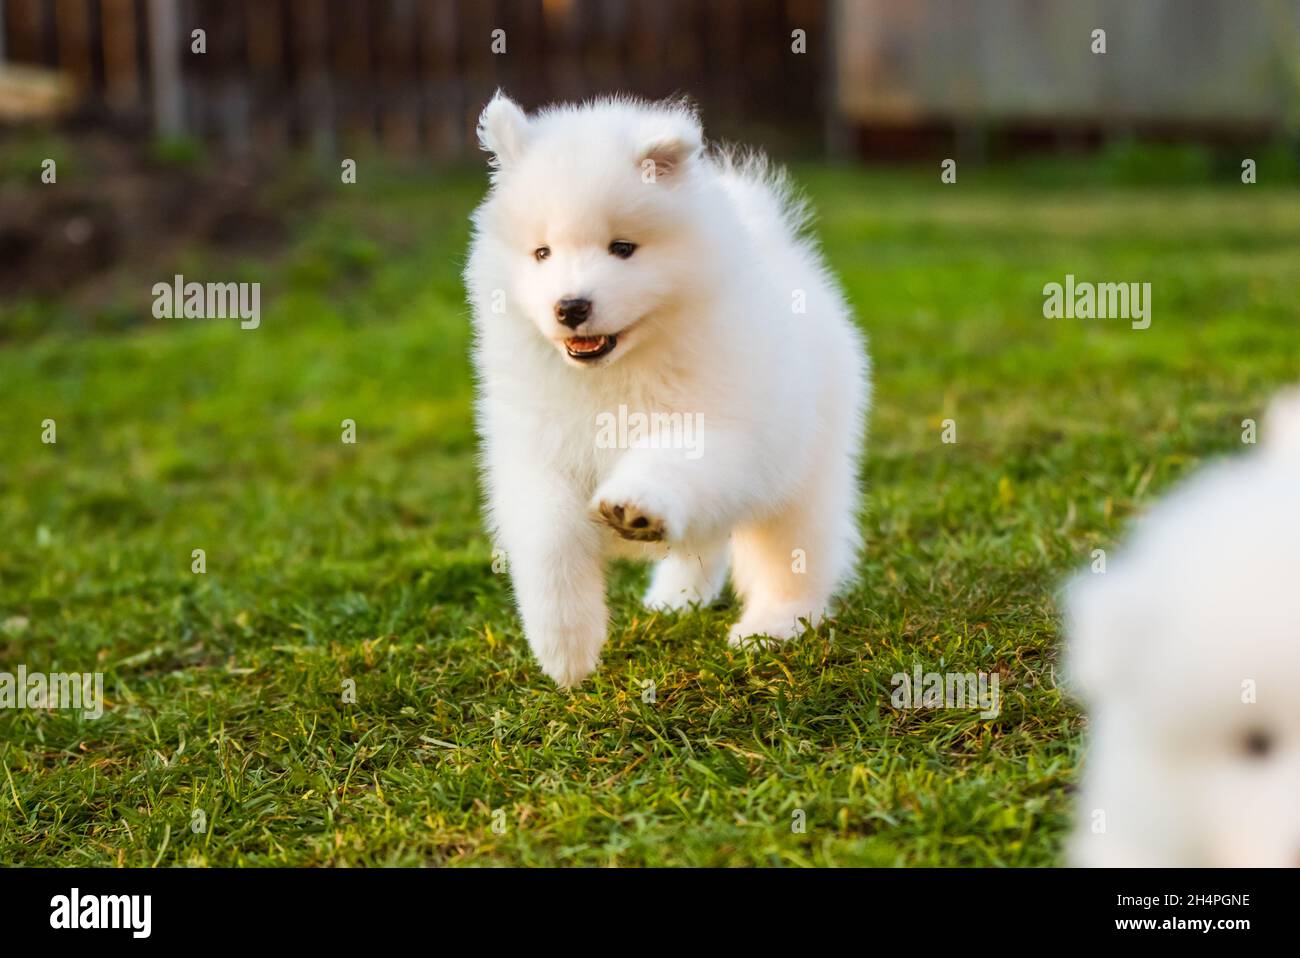 Adorable samoyed puppy running in motion on the lawn Stock Photo